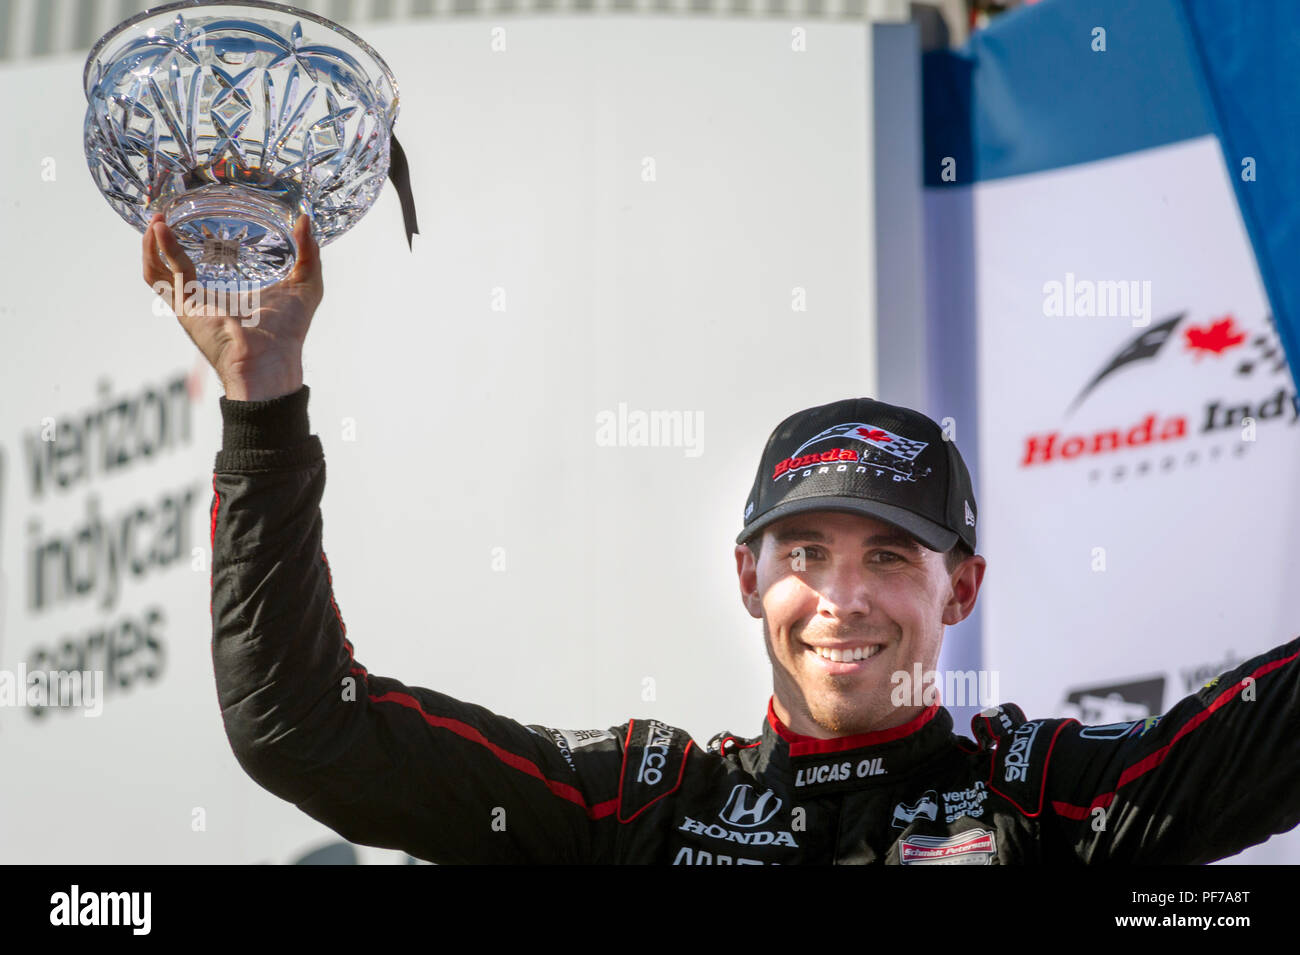 Podium winners celebration at Indy car race day in Toronto, July 15, 2018. Canadian driver Robert Wickens finished the third Stock Photo